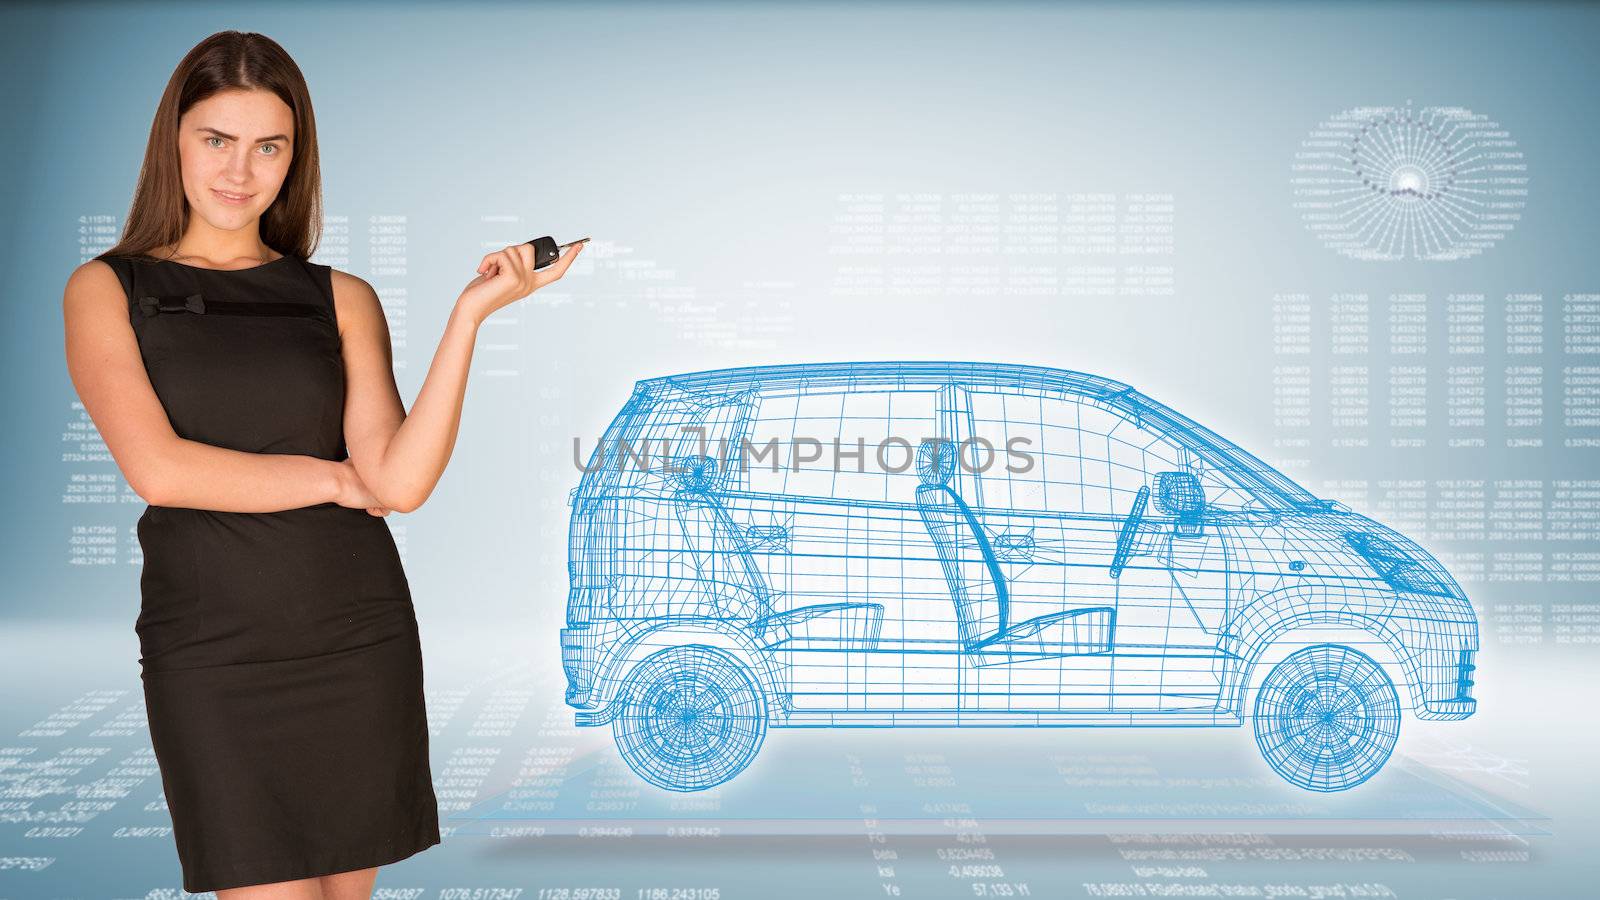 Businesswoman with key and wire frame car. High-tech graphs at backdrop